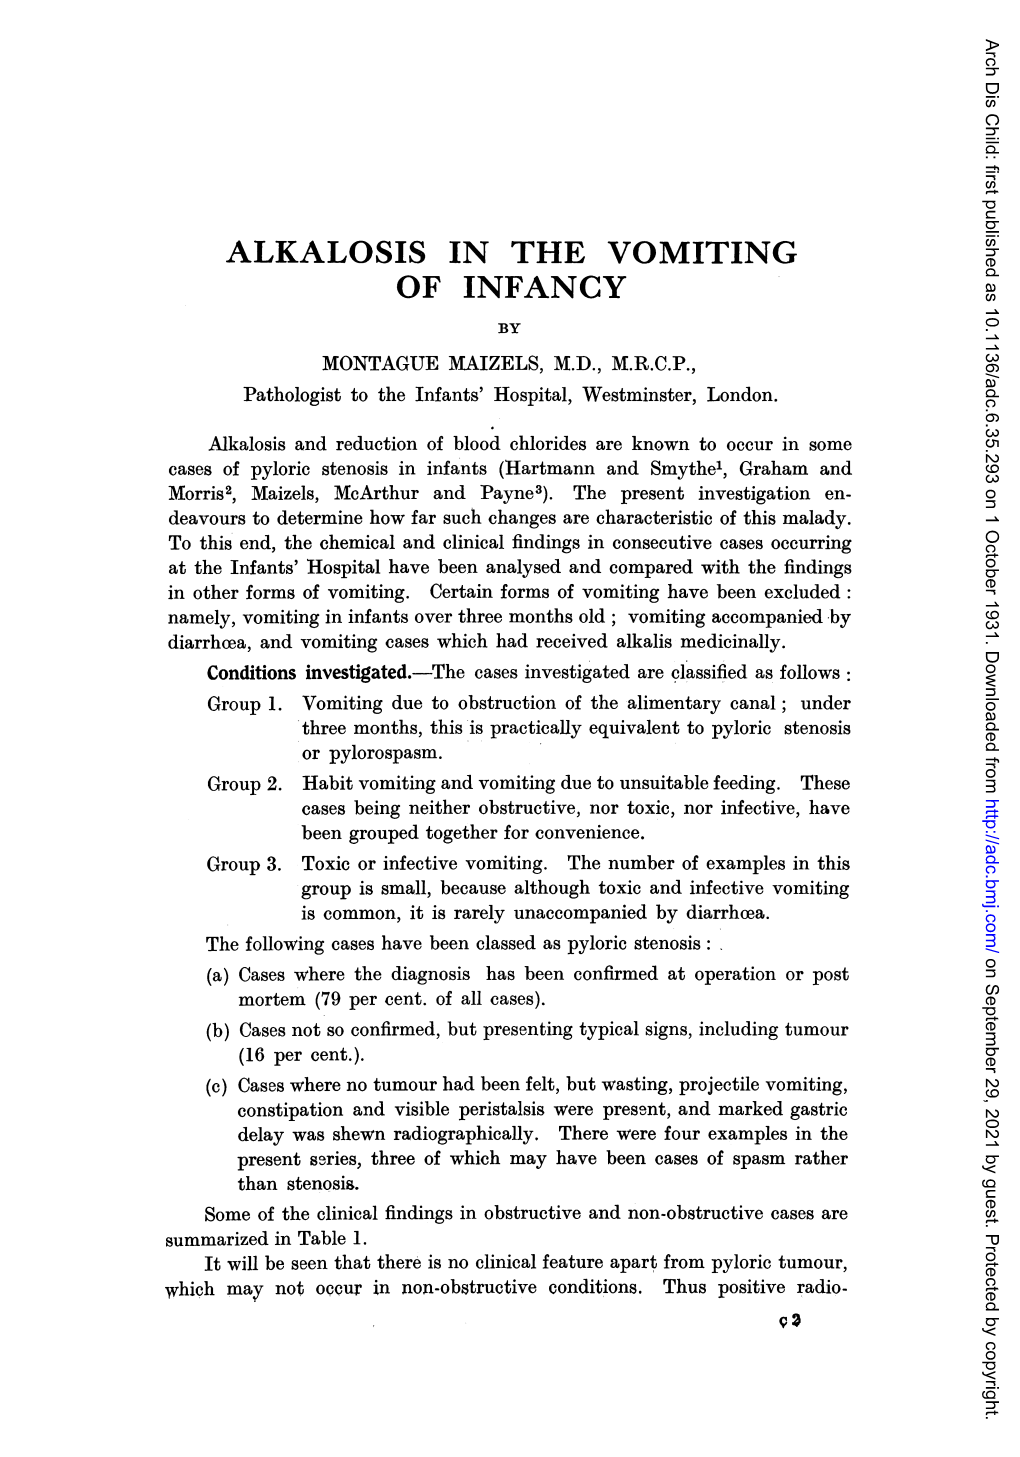 ALKALOSIS in the VOMITING of INFANCY by MONTAGUE MAIZELS, M.D., M.R.C.P., Pathologist to the Infants' Hospital, Westminster, London